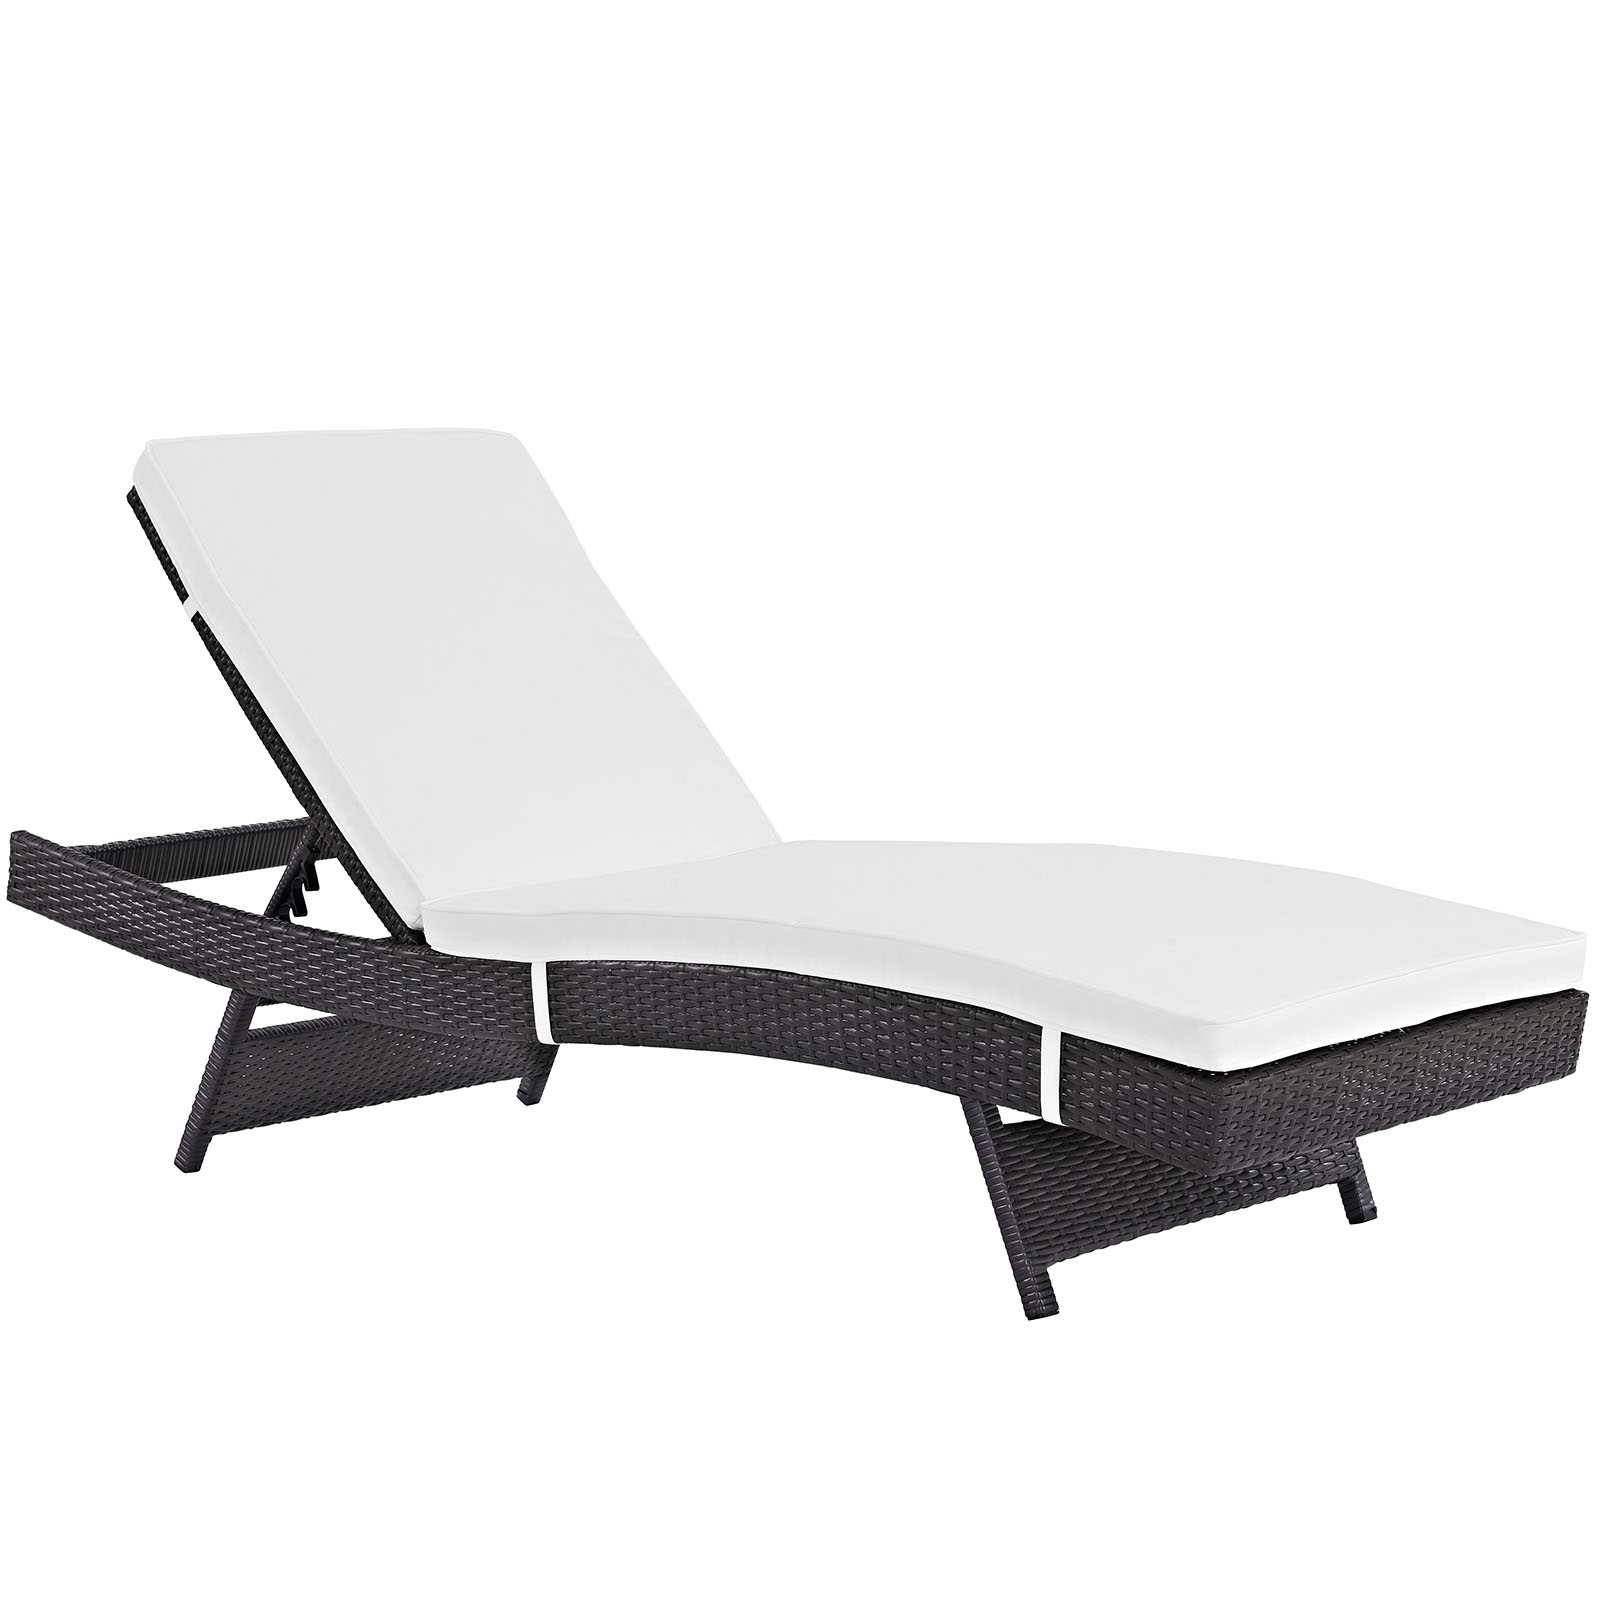 Modway Convene Chaise Outdoor Patio Set of 6 in Espresso White - image 3 of 5